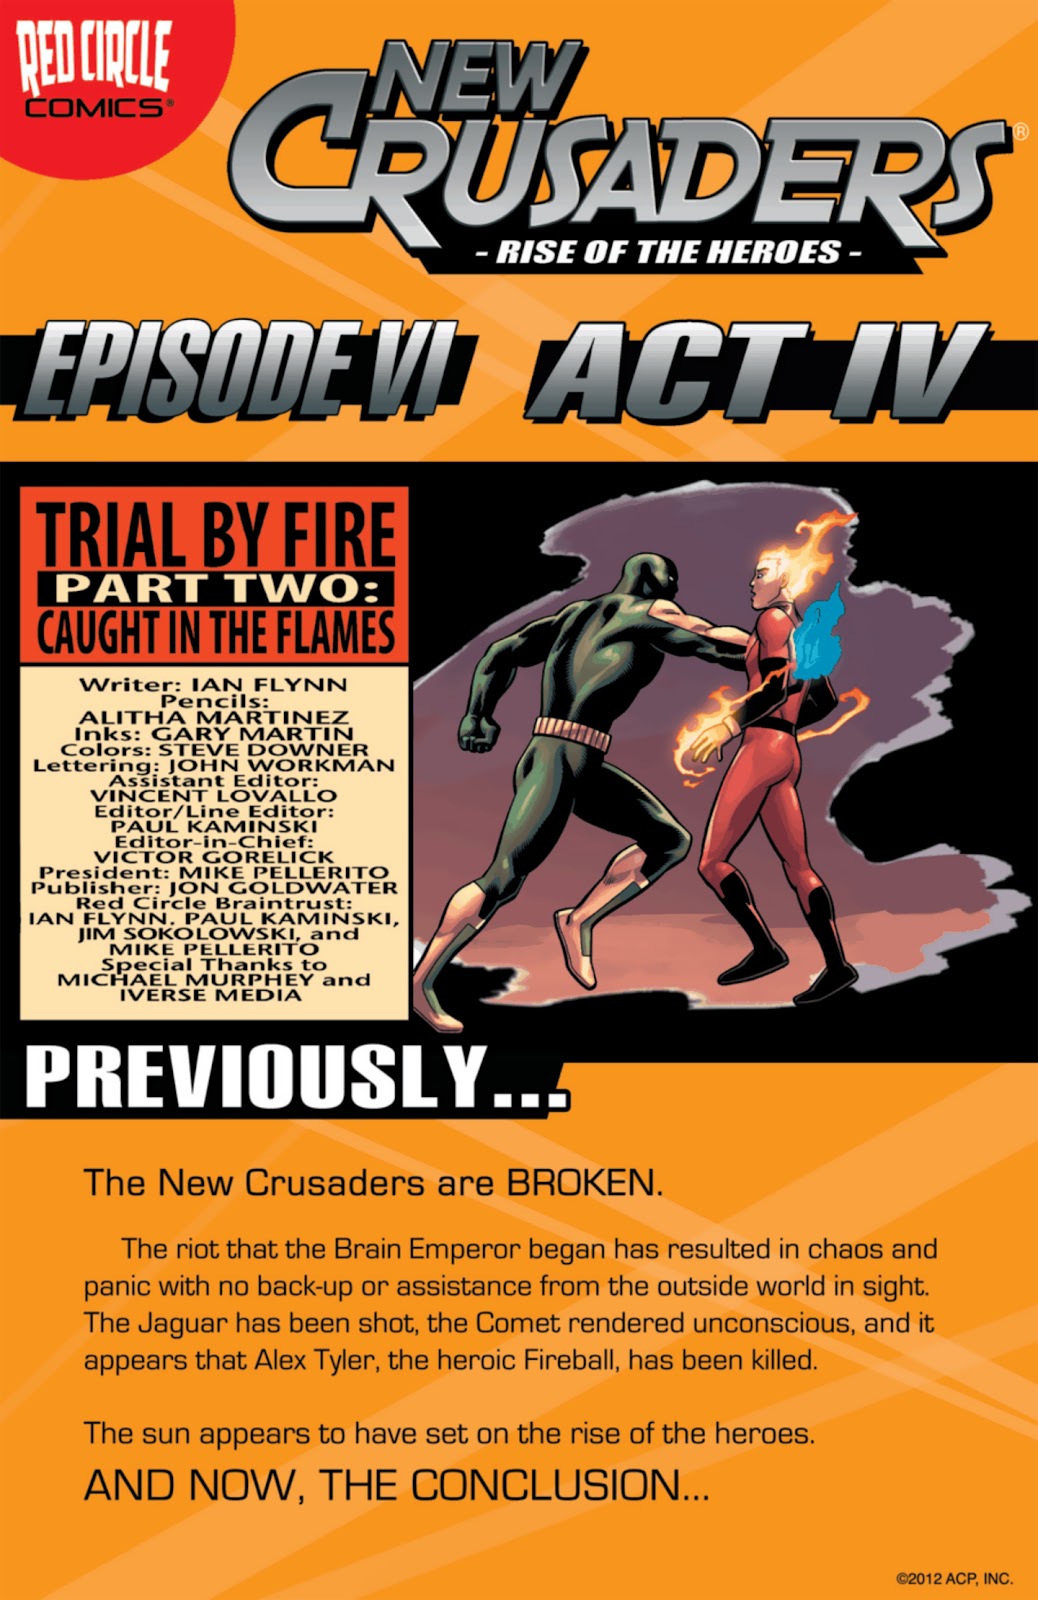 New Crusaders: Rise Of The Heroes issue 6 - Act IV - Page 1